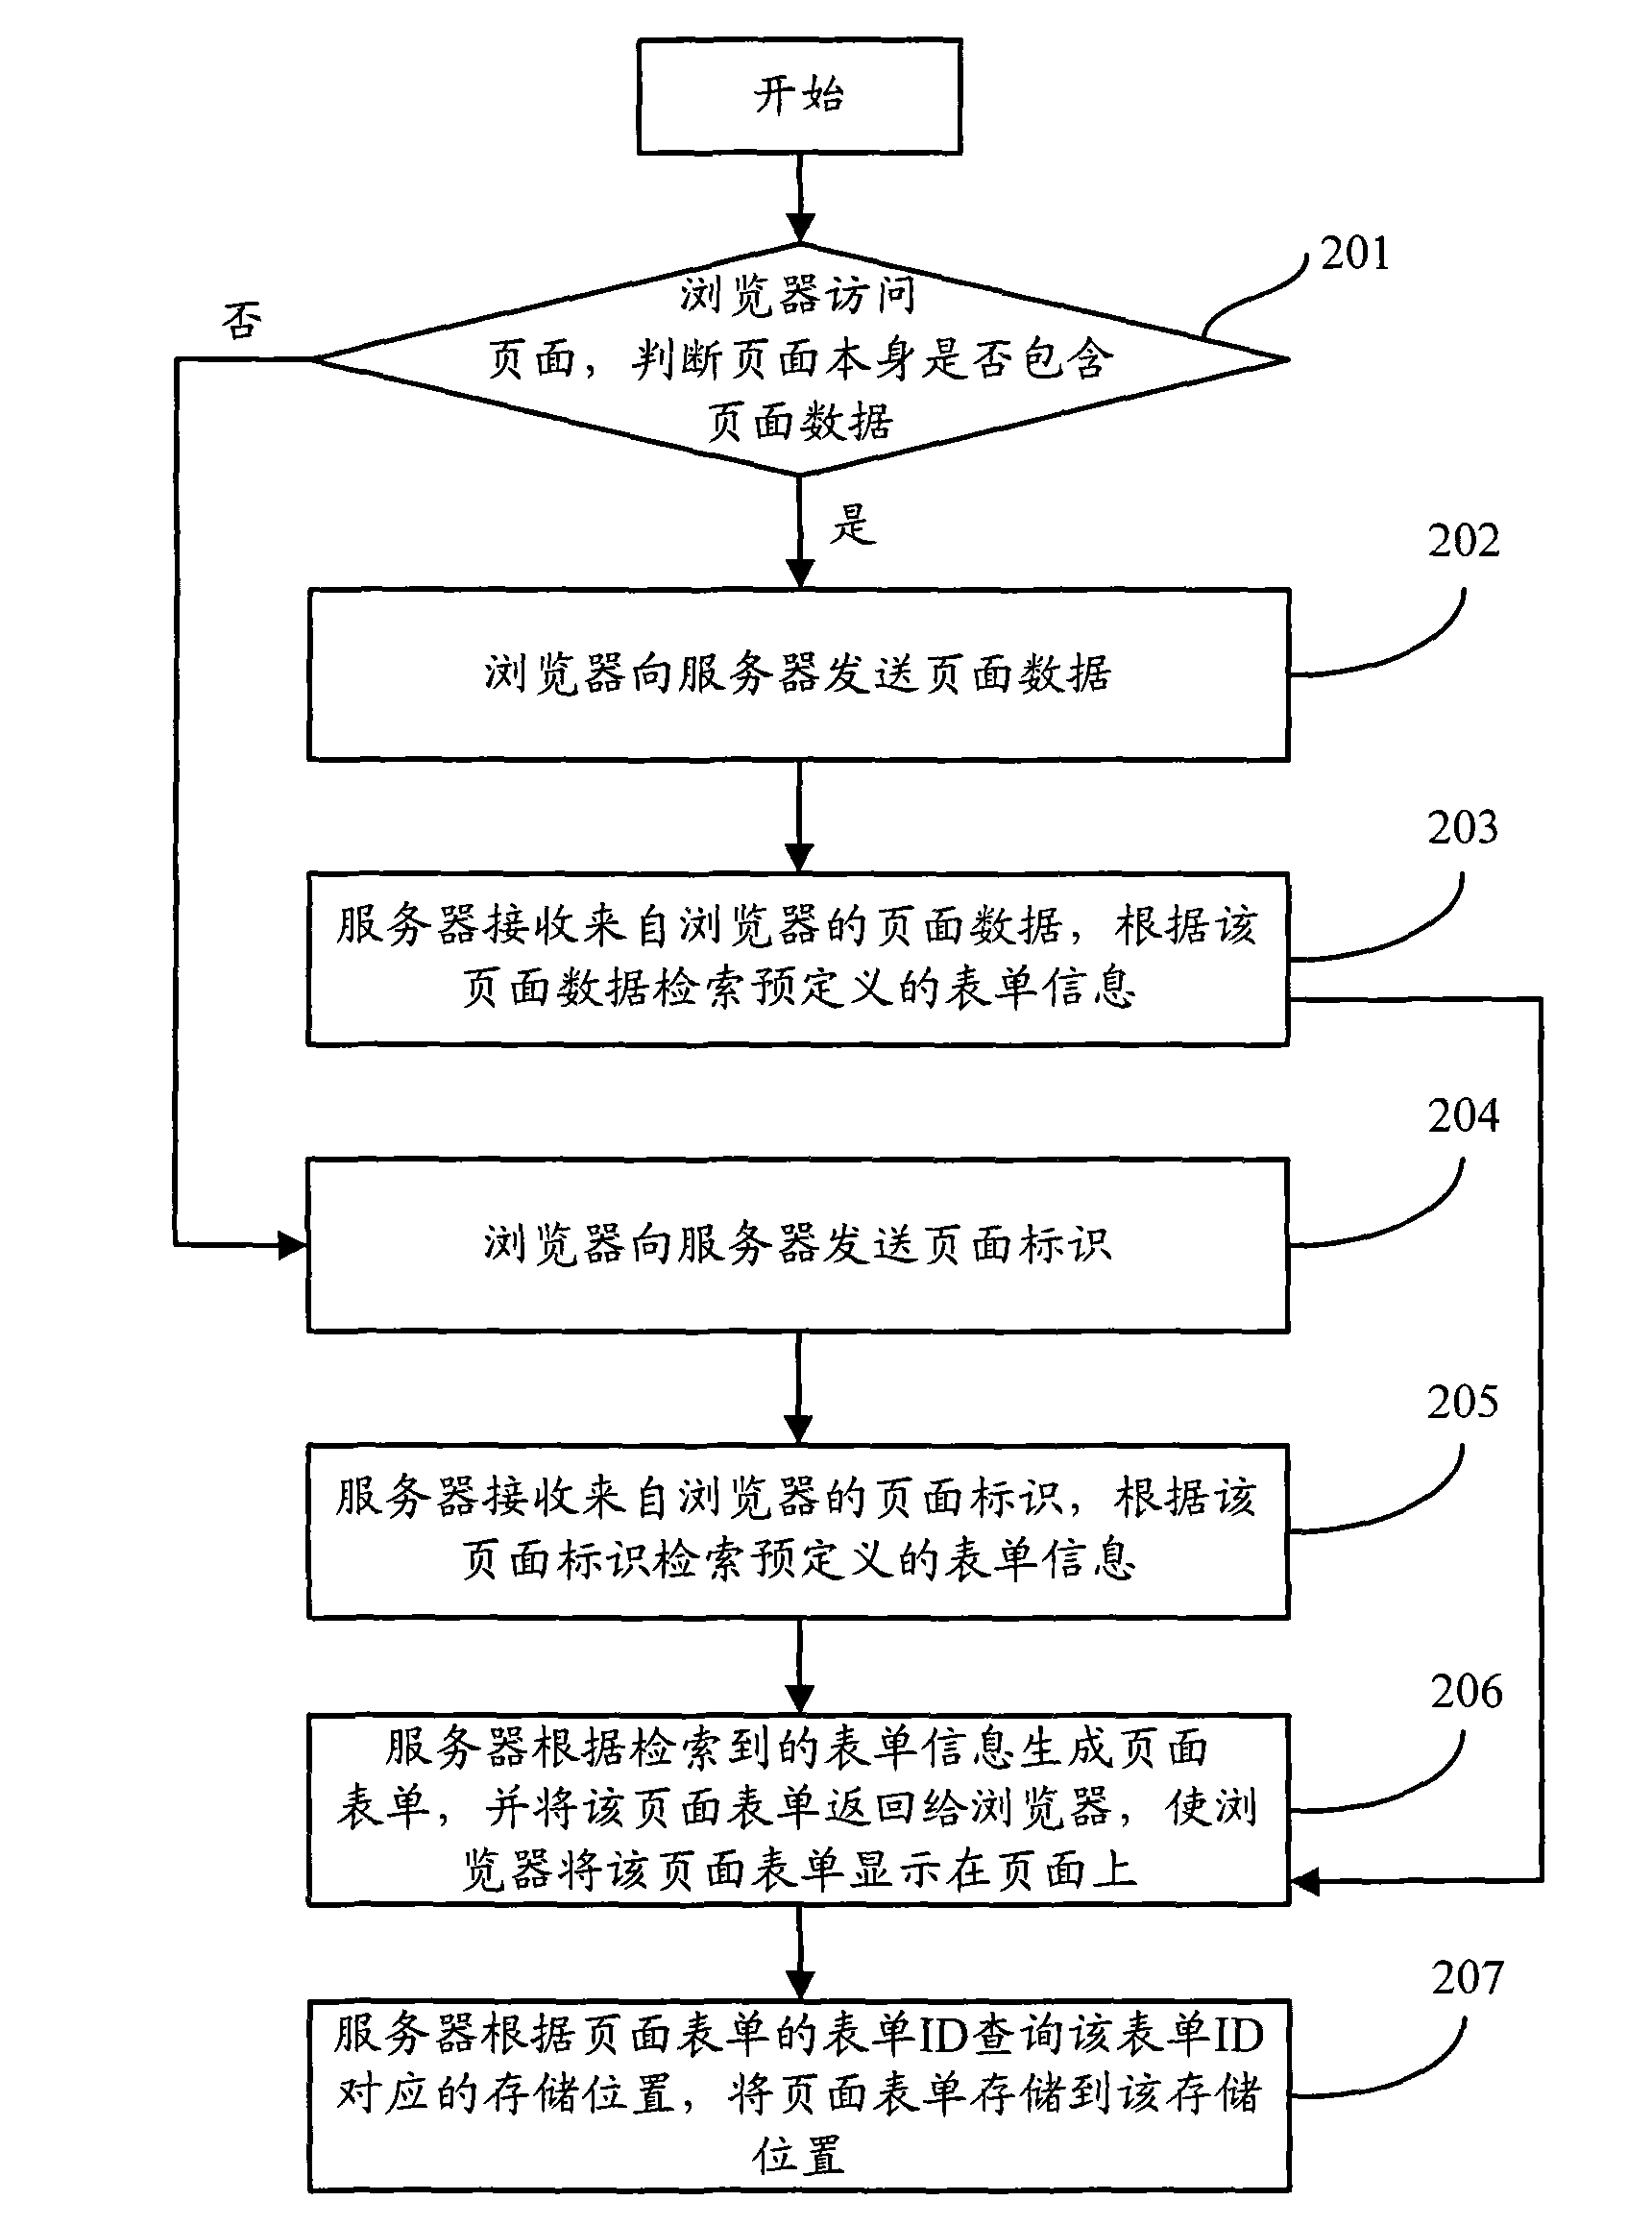 Method, device and system for generating page form